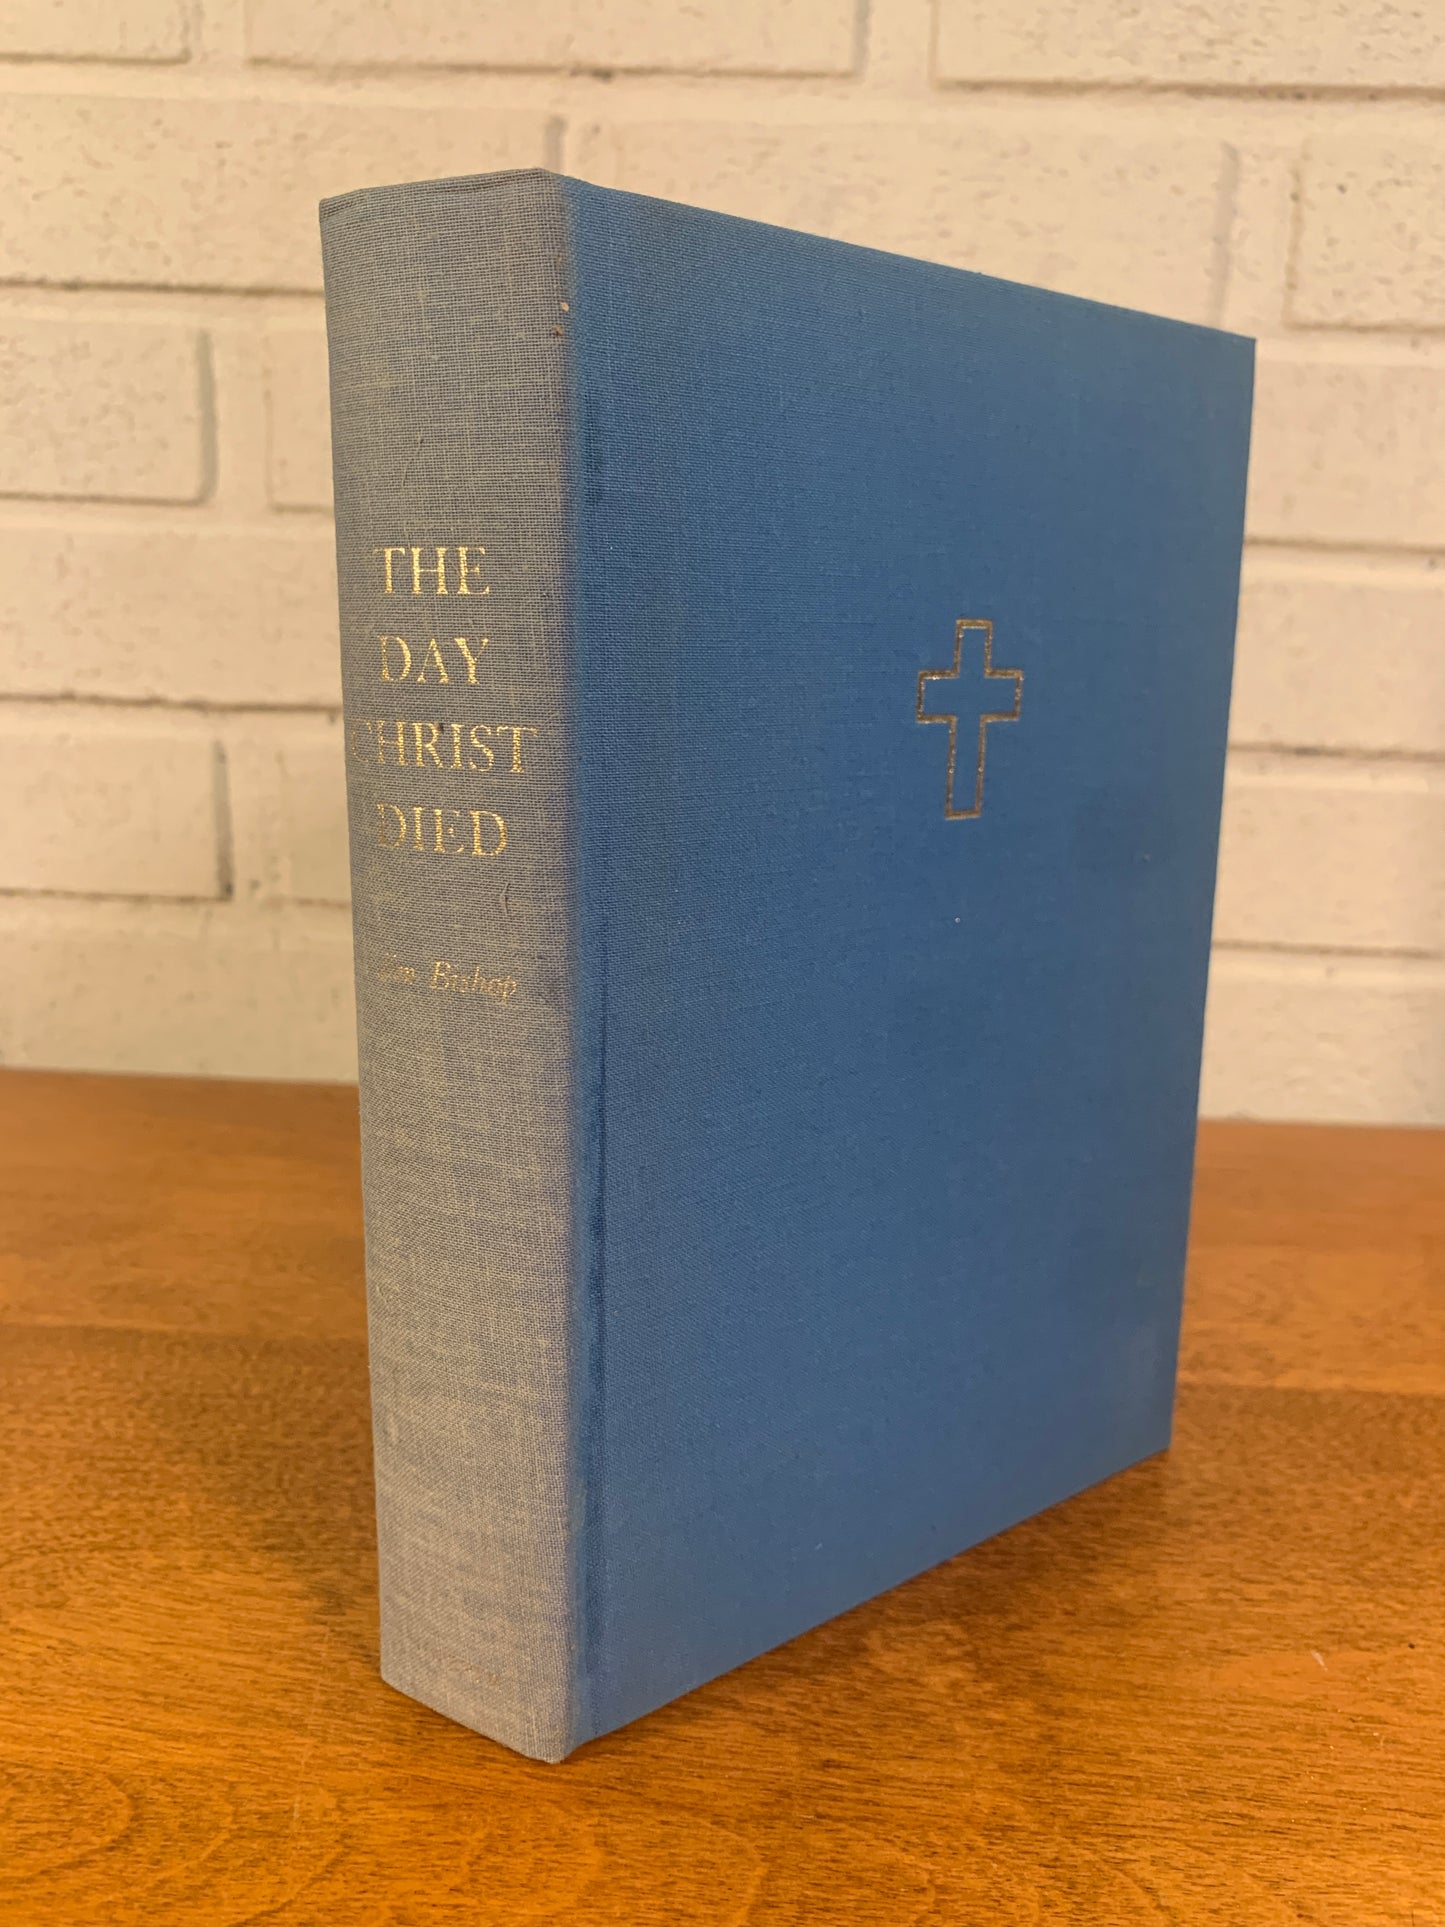 The Day Christ Died by Jim Bishop w/ Slipcase